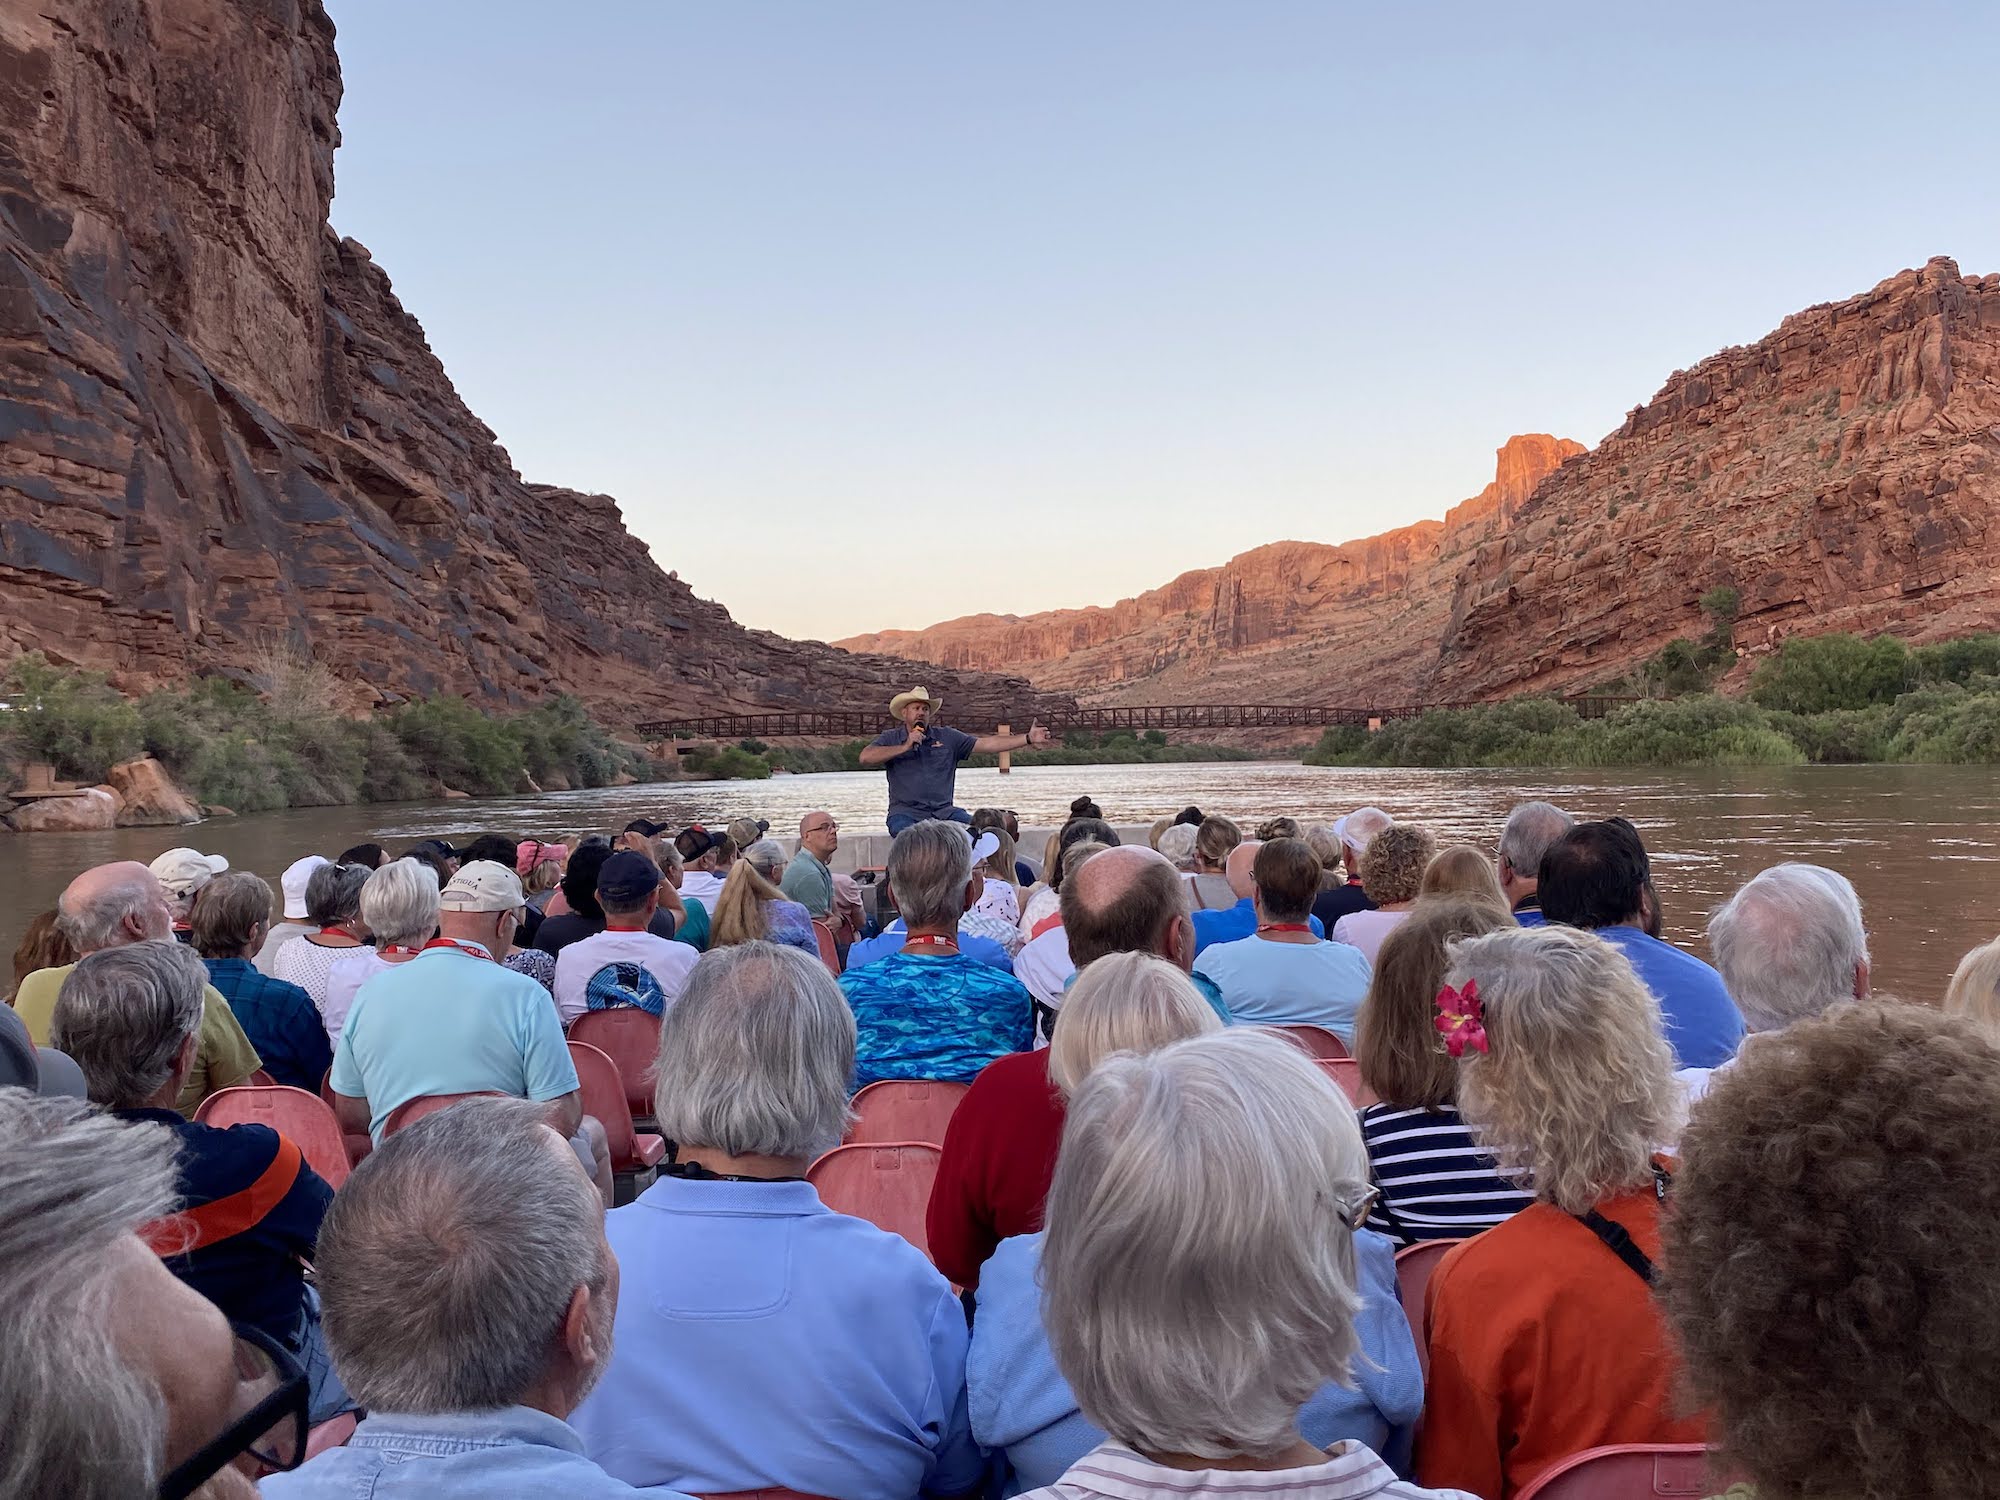 A man addresses a boat full of people at the Colorado River cruise